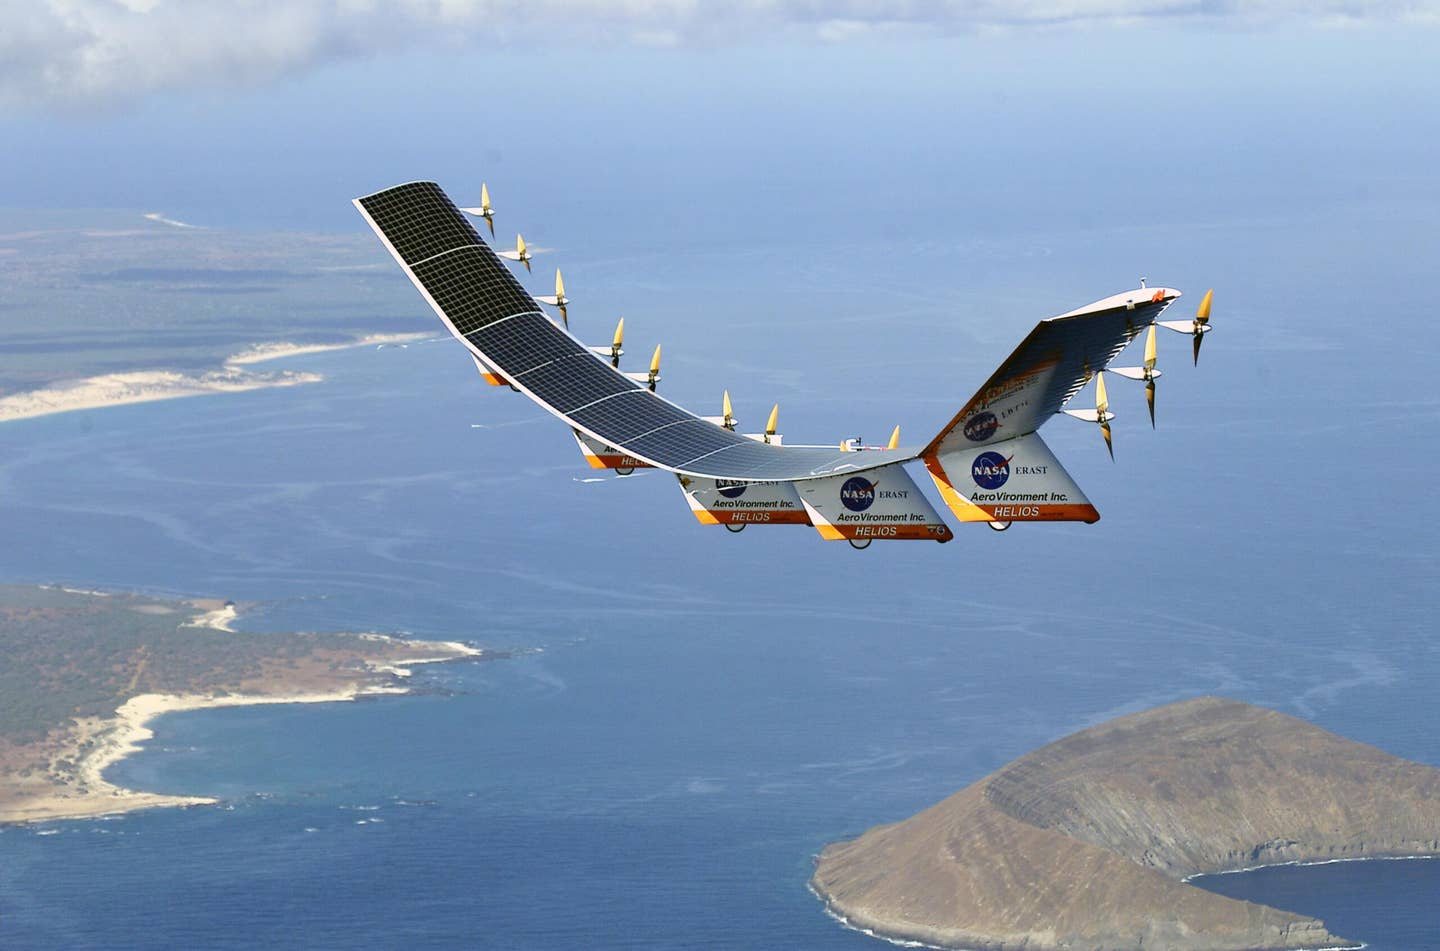 An aircraft similar to NASA’s solar-powered HELIOS is one example of the type of long-endurance, high-flying aircraft that could benefit from such a flying recharging station.